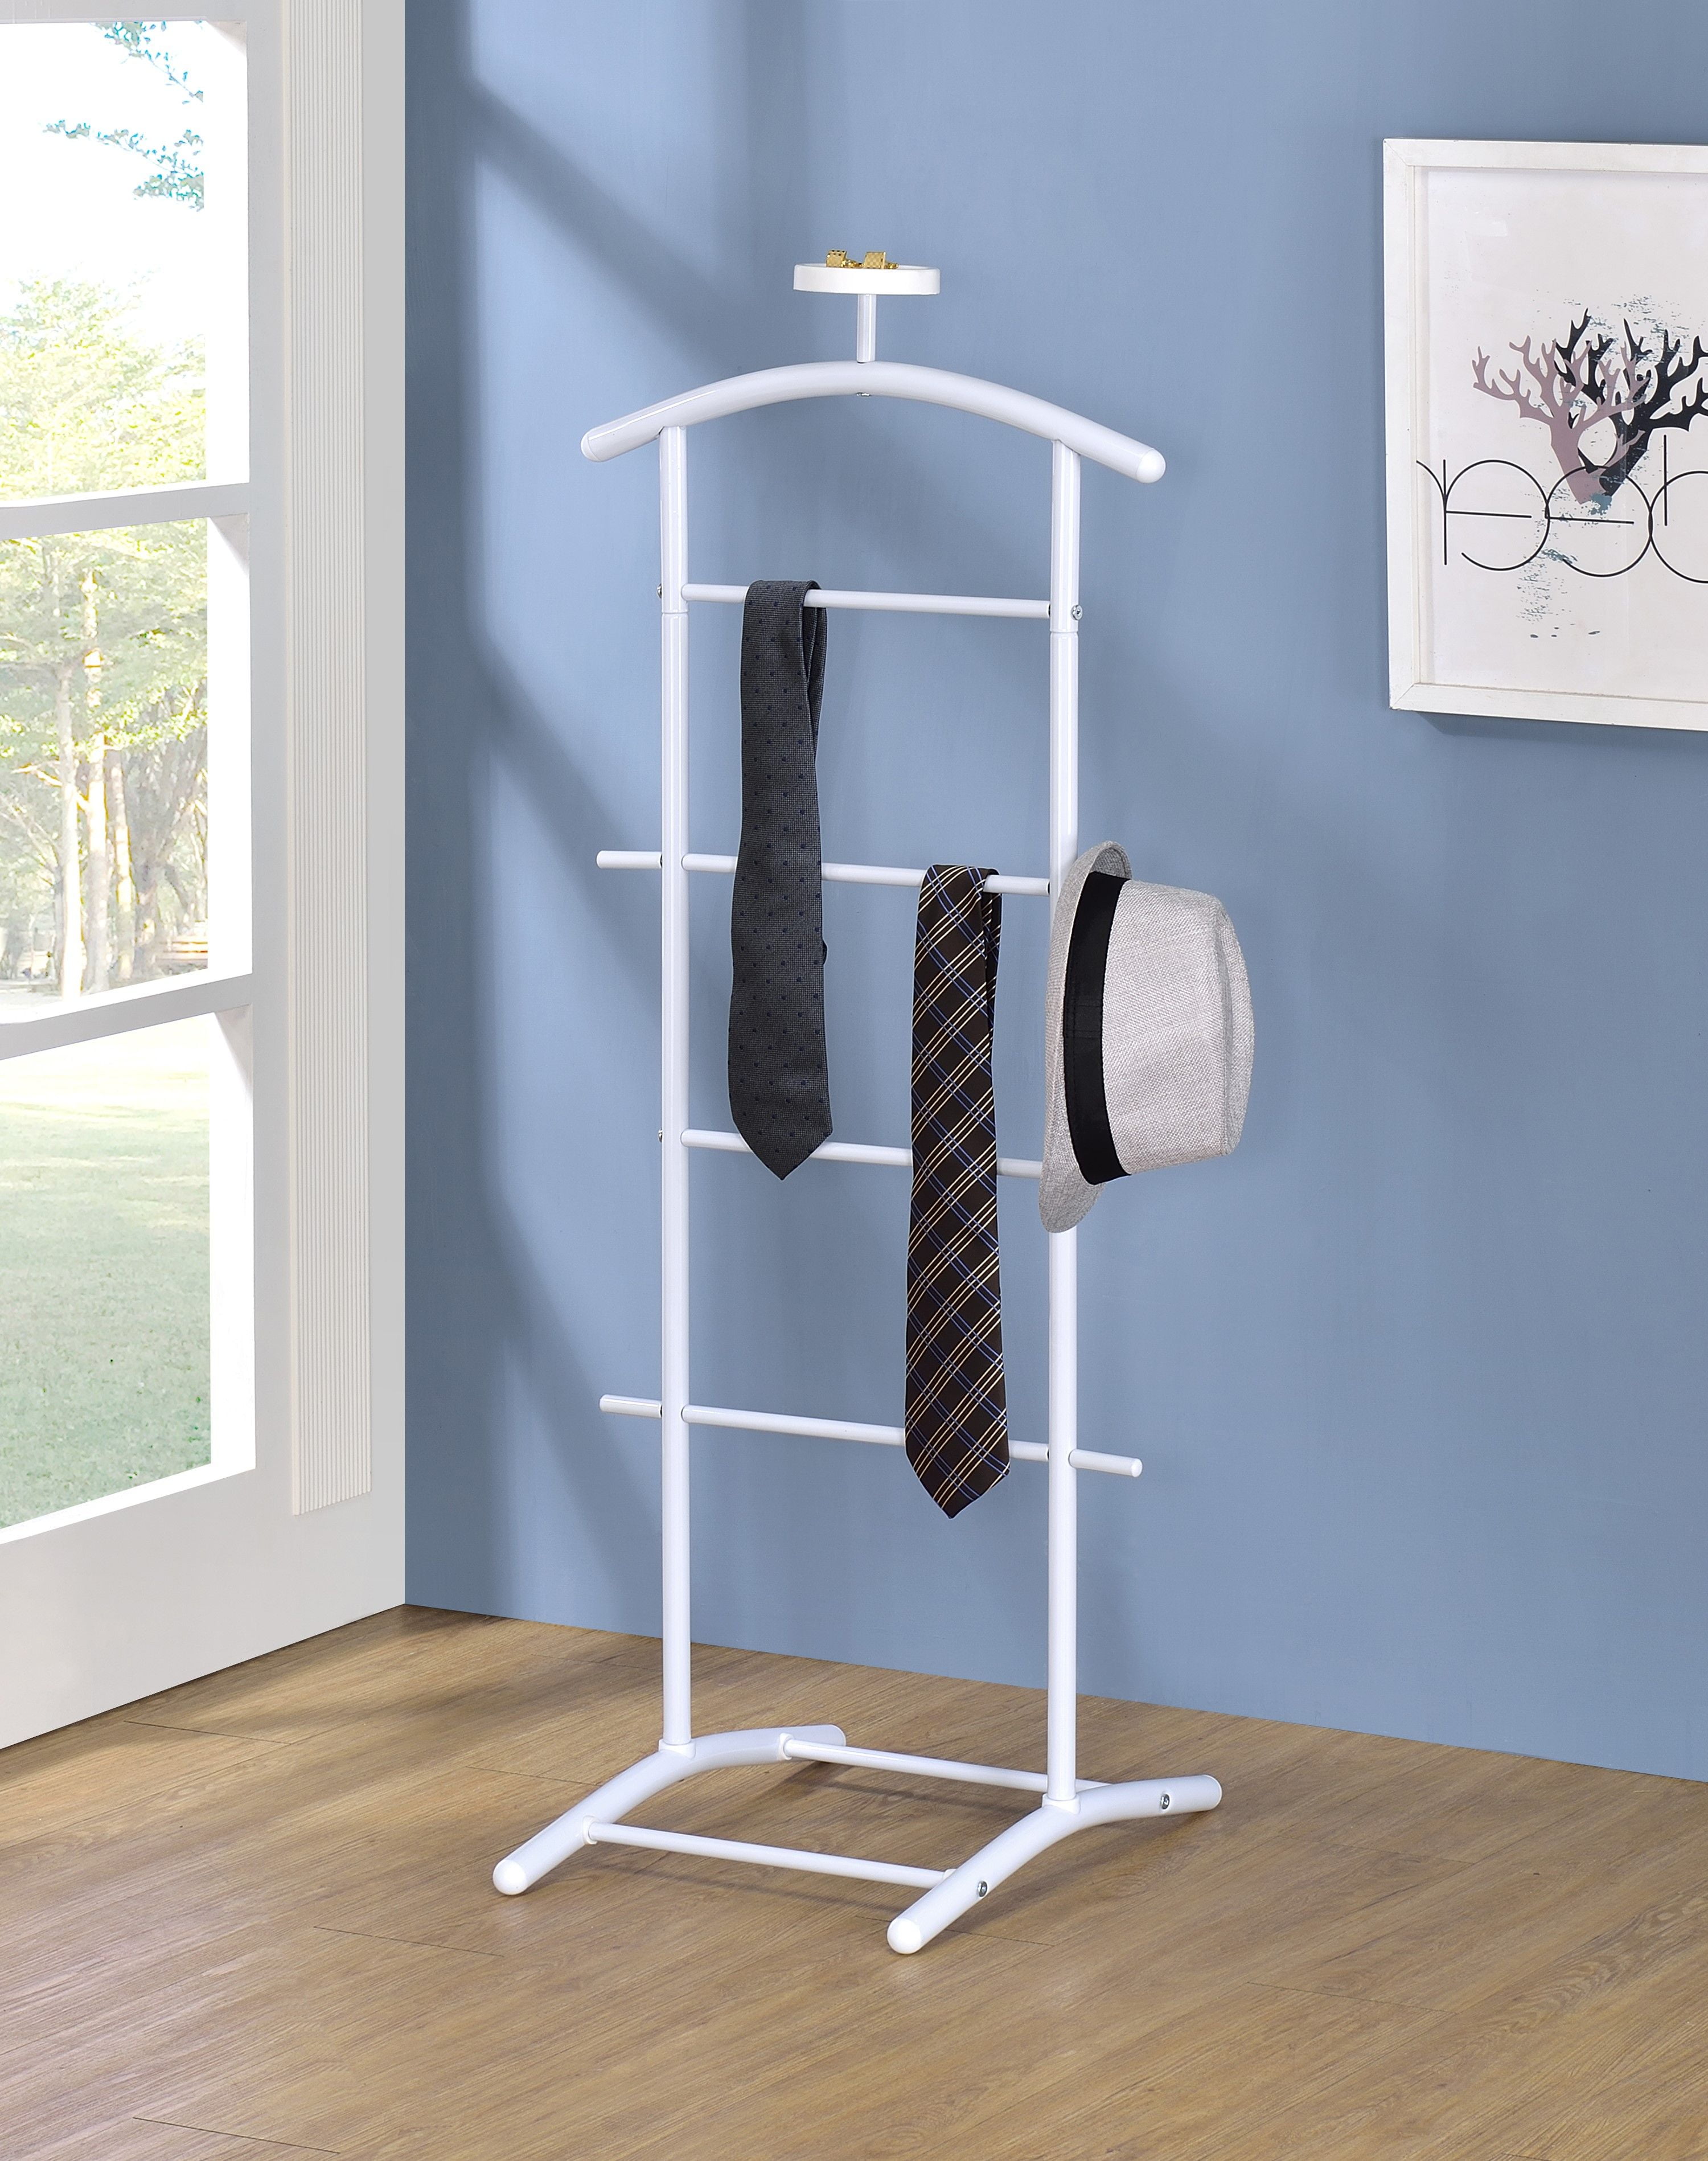 Men's Suit Valet Stand Clothes Storage Shoe Organizer Drawers Charger Outlet 